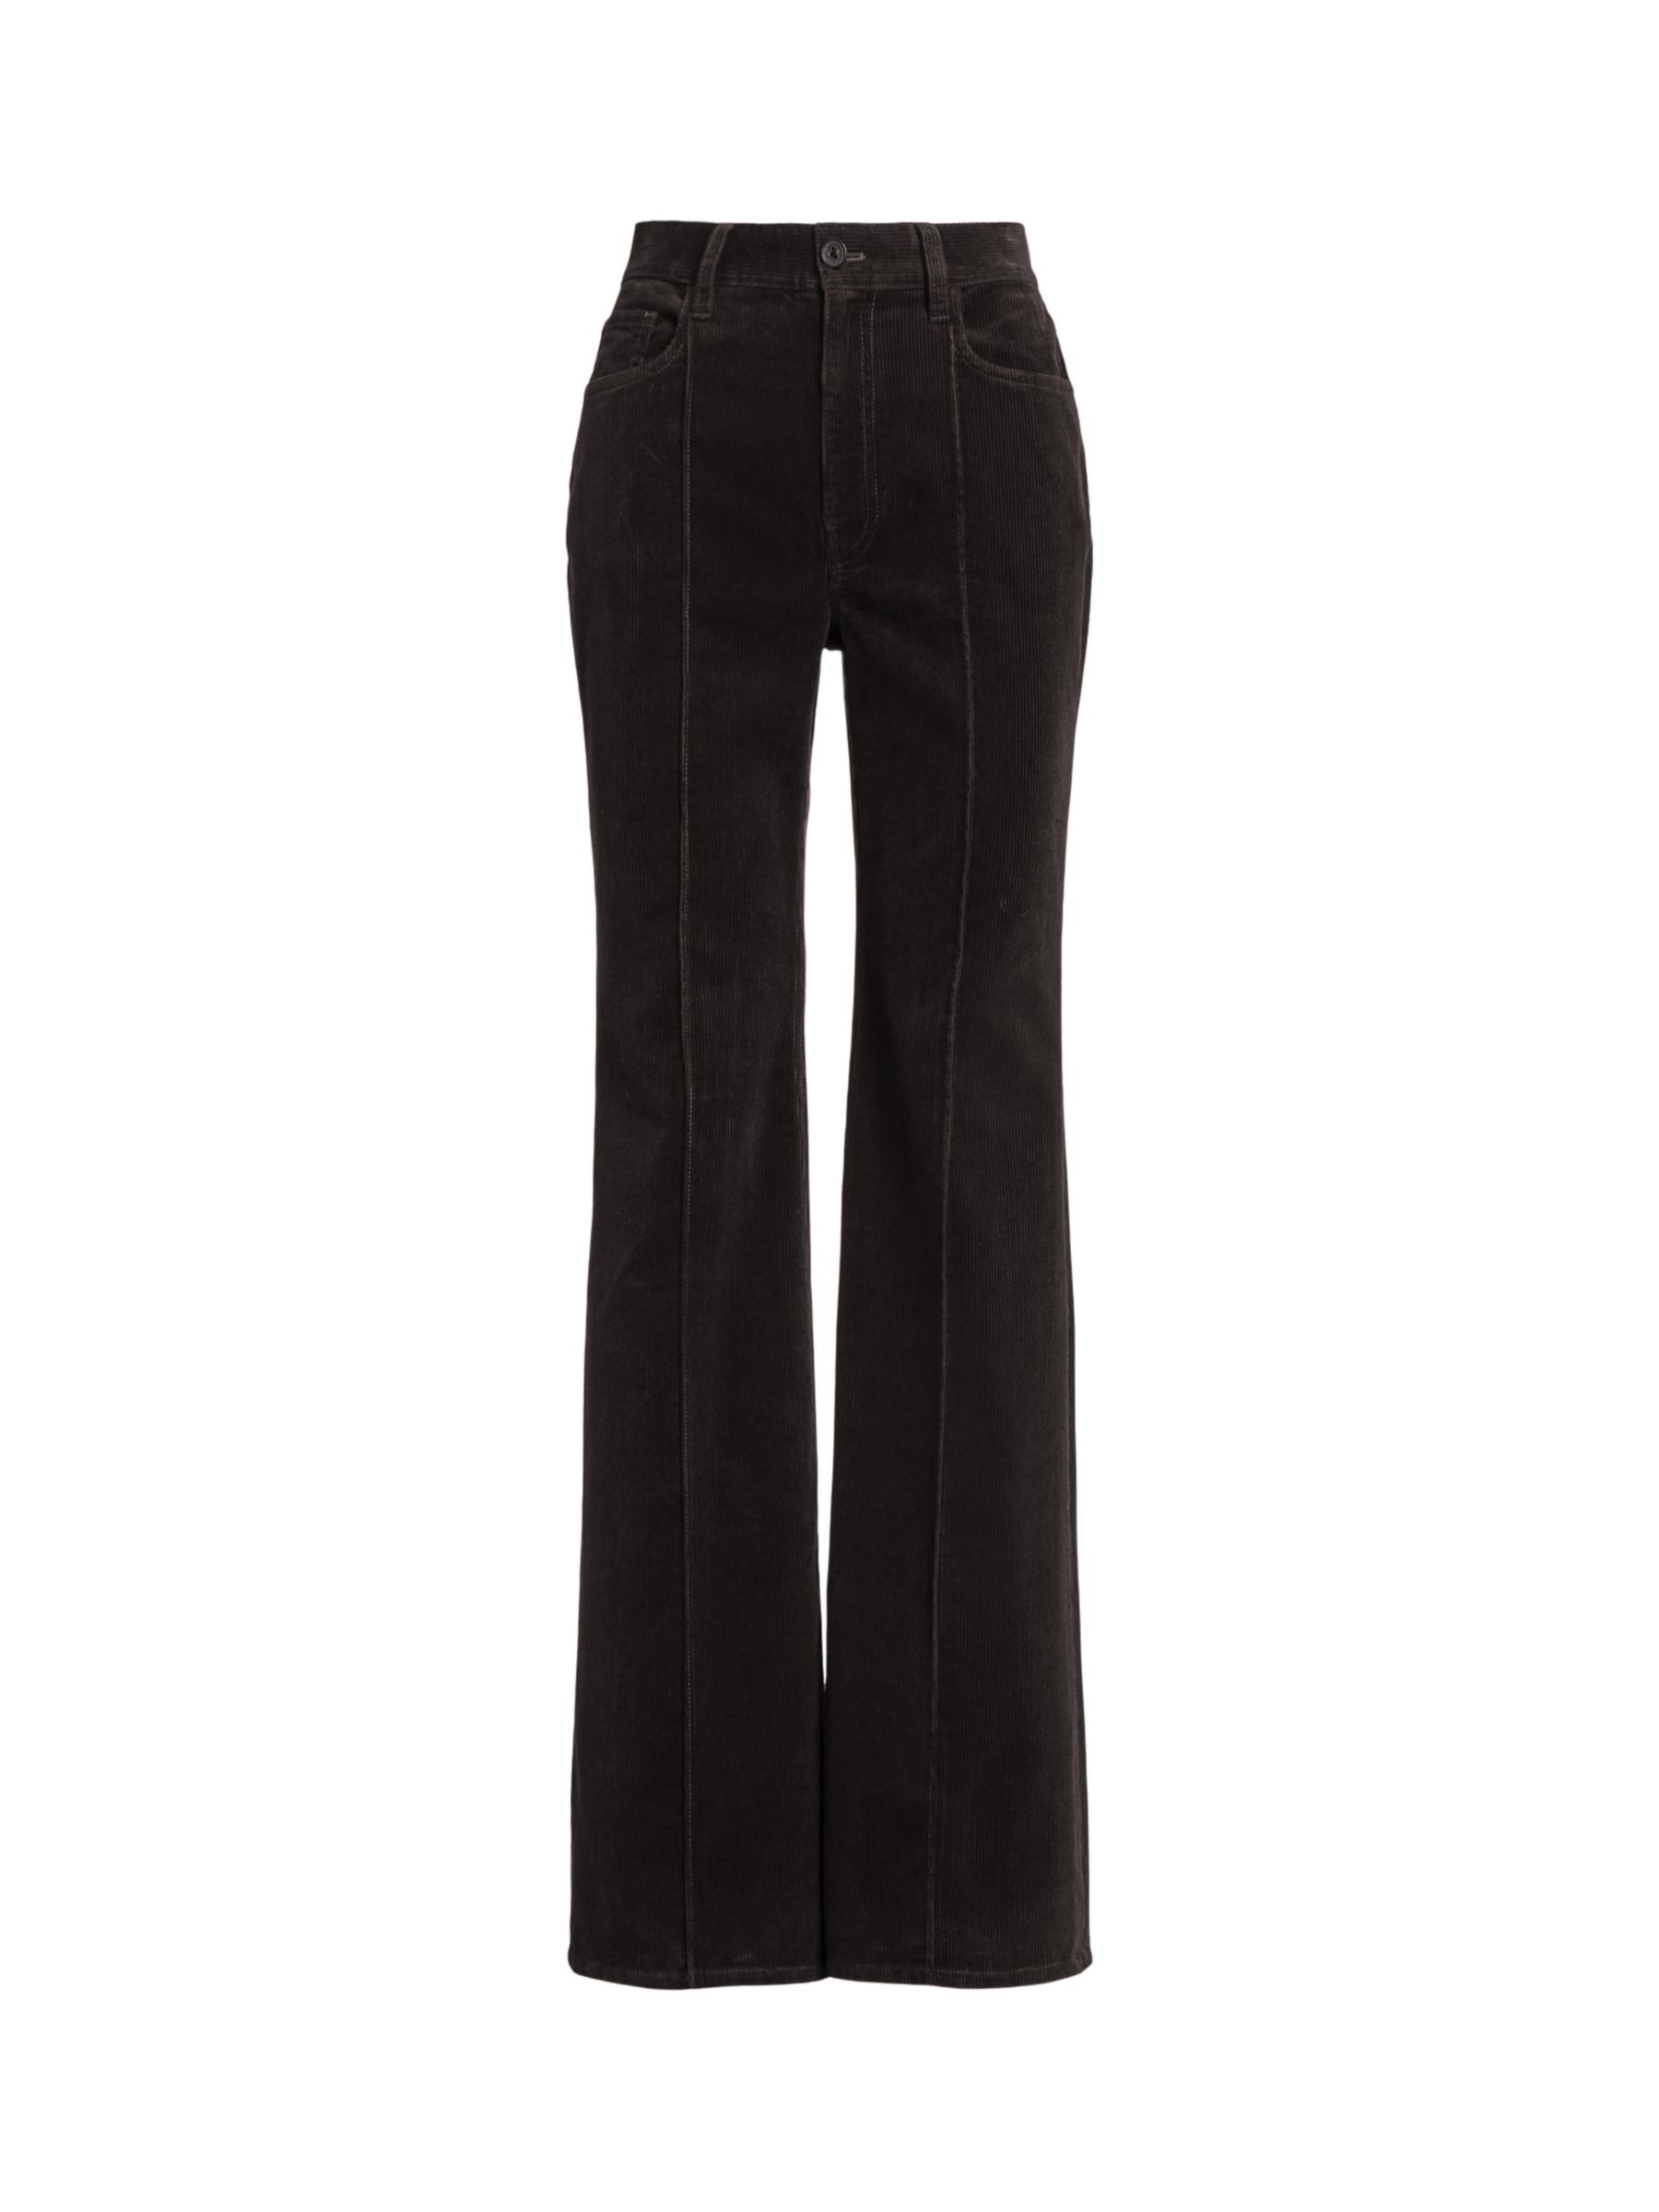 Polo Ralph Lauren Pintucked Corduroy Flare Flat Front Trousers, Black ...